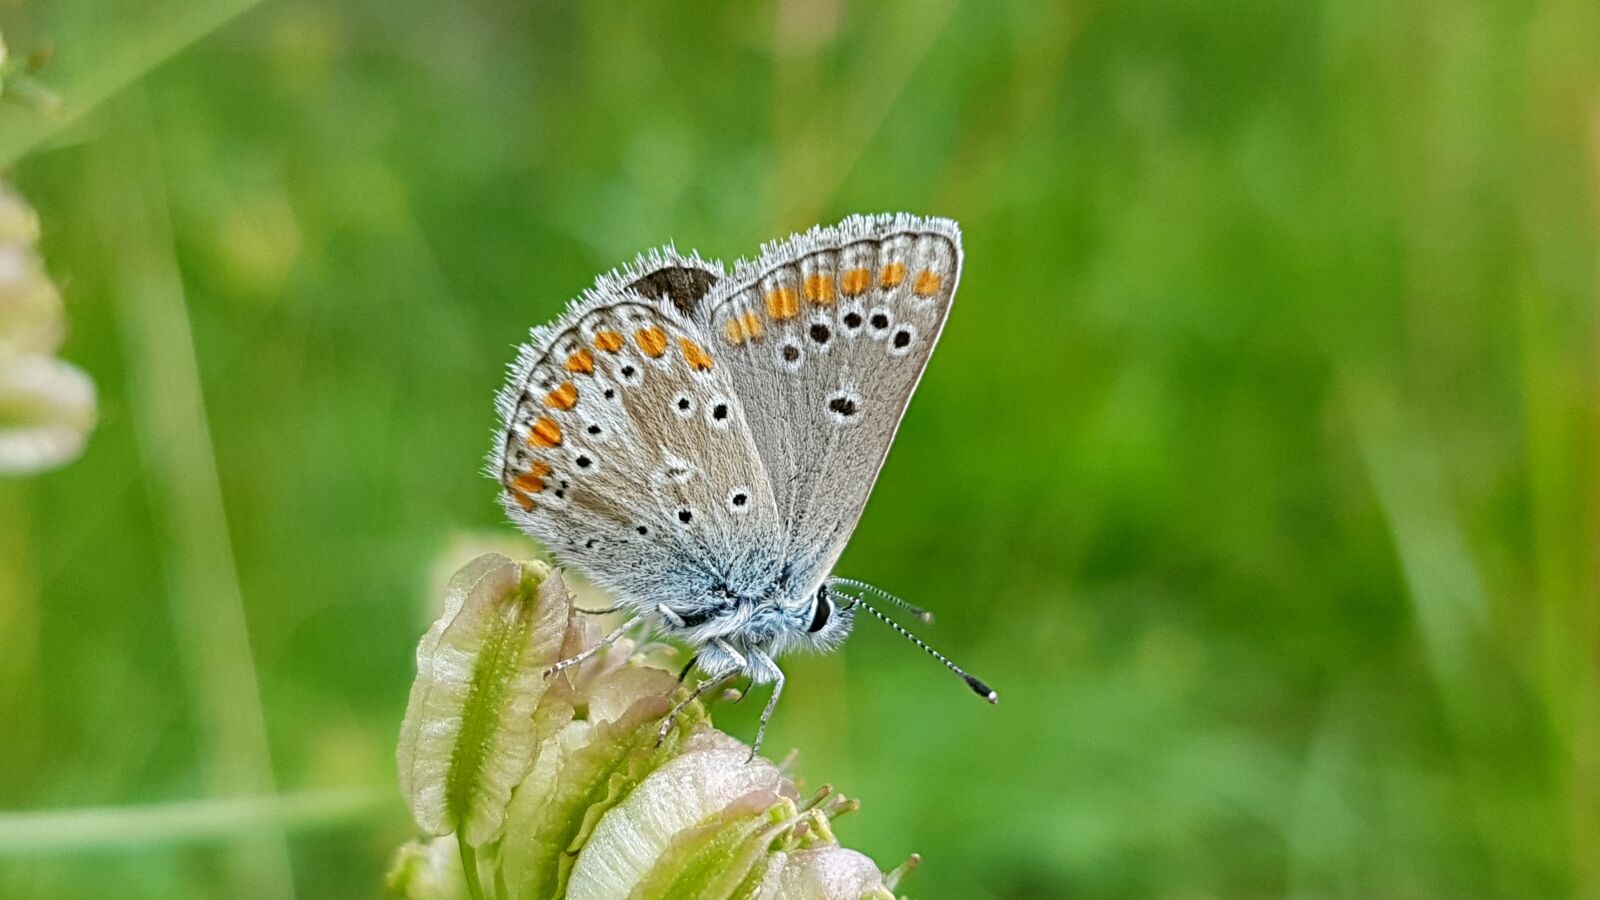 Samsung Galaxy S7 sample photo. Butterfly, common blue, insect photography